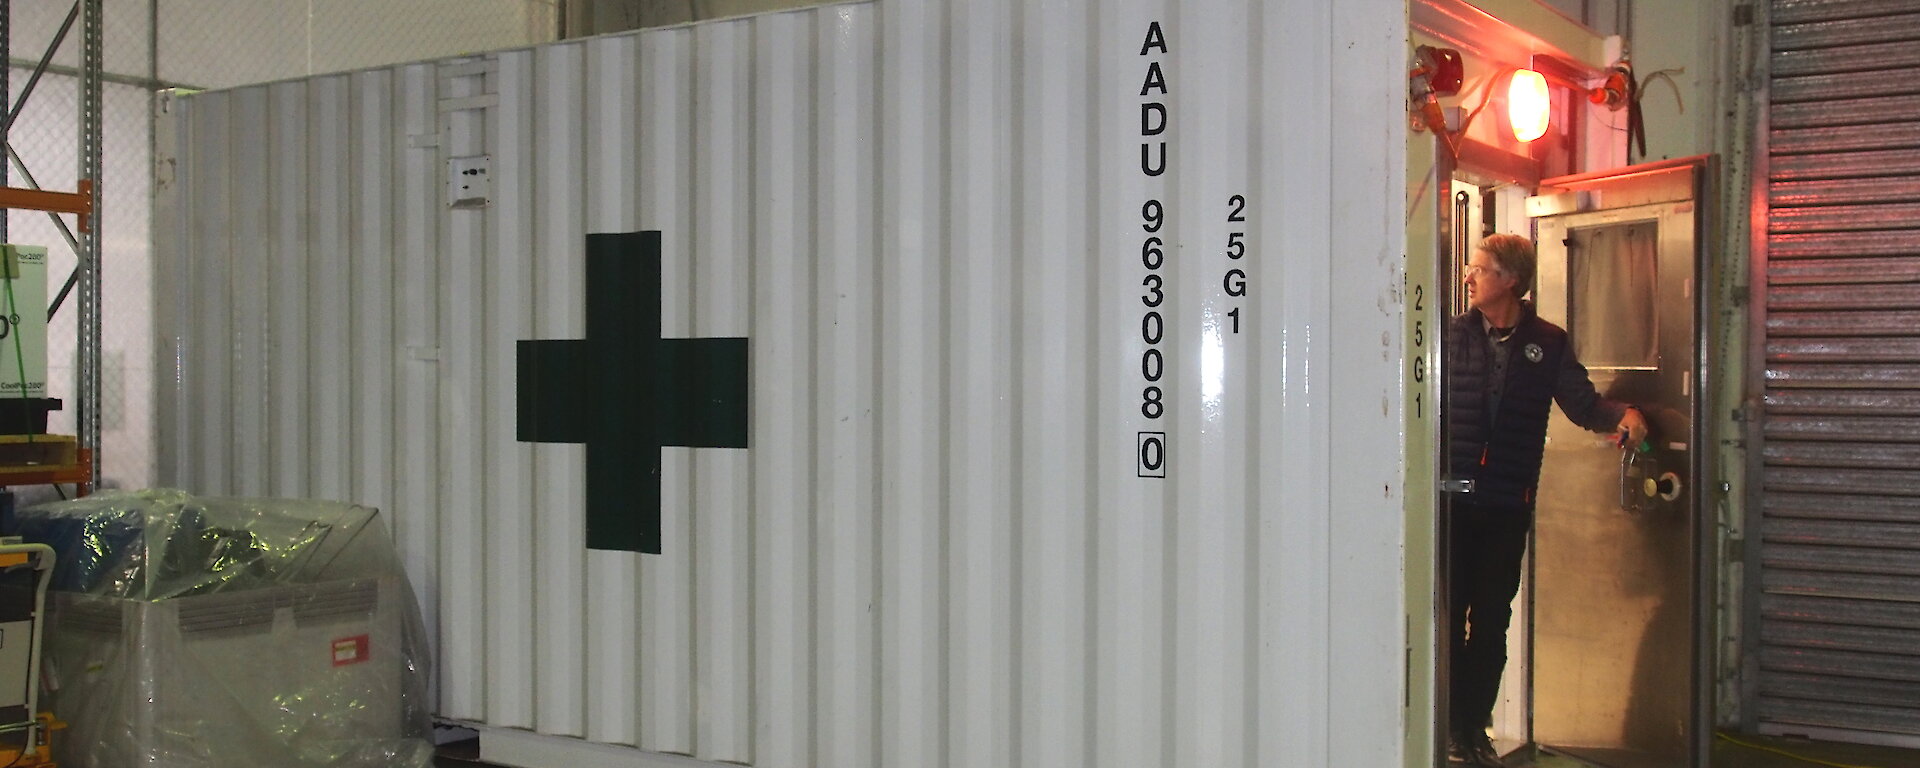 A white shipping container with a green cross on the side.